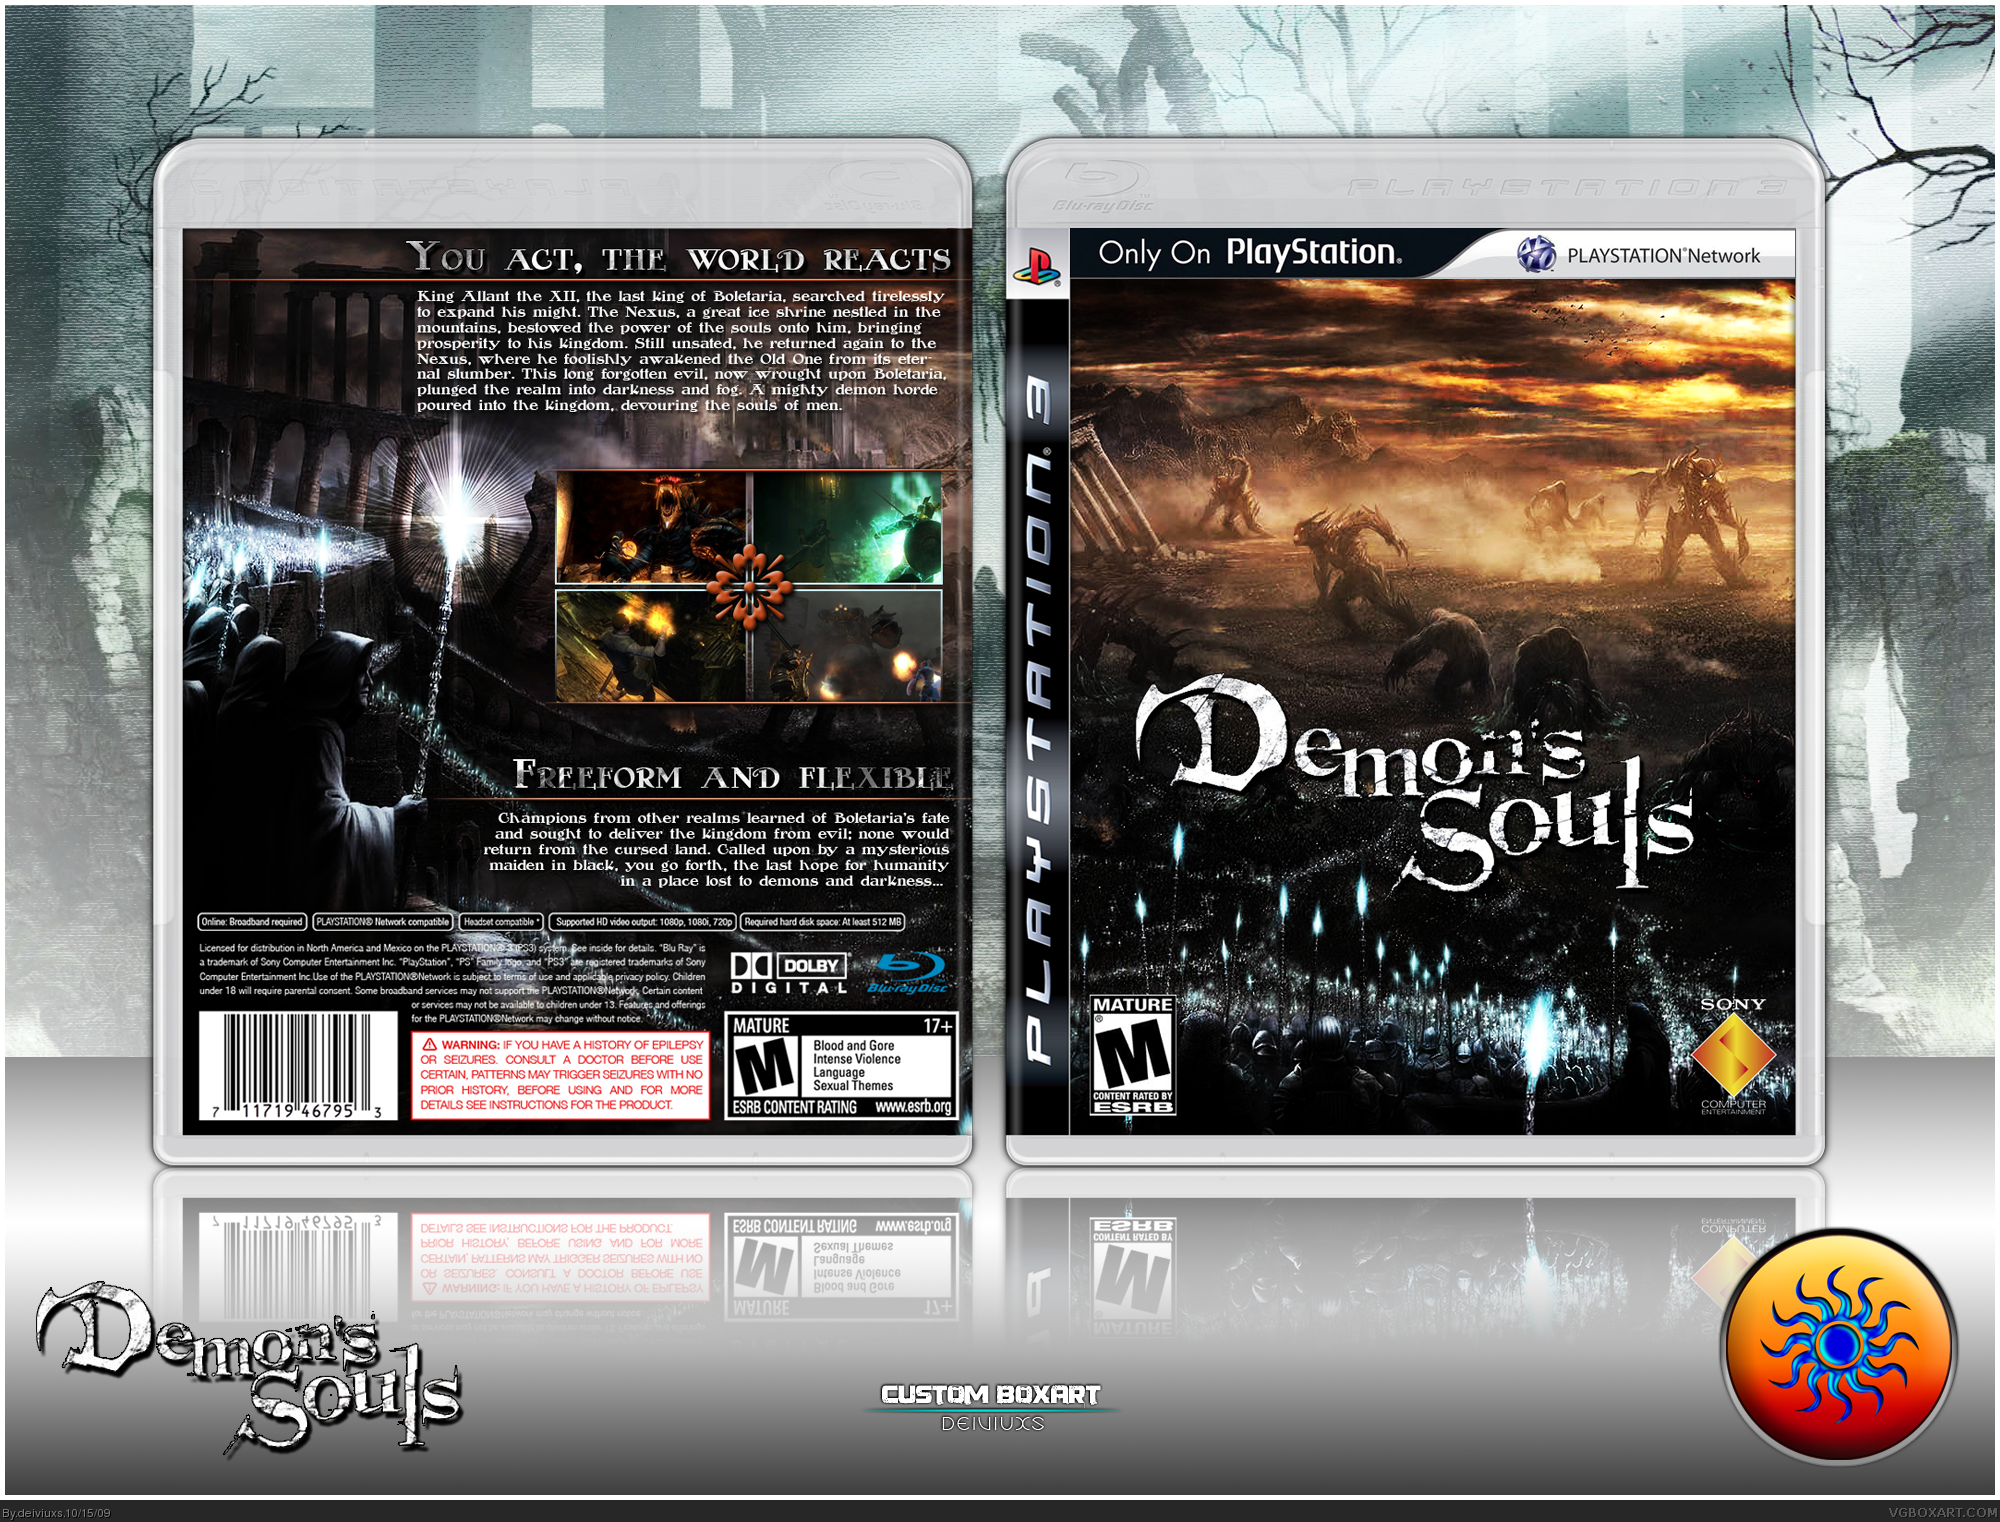 Viewing full size Demon's Souls box cover.